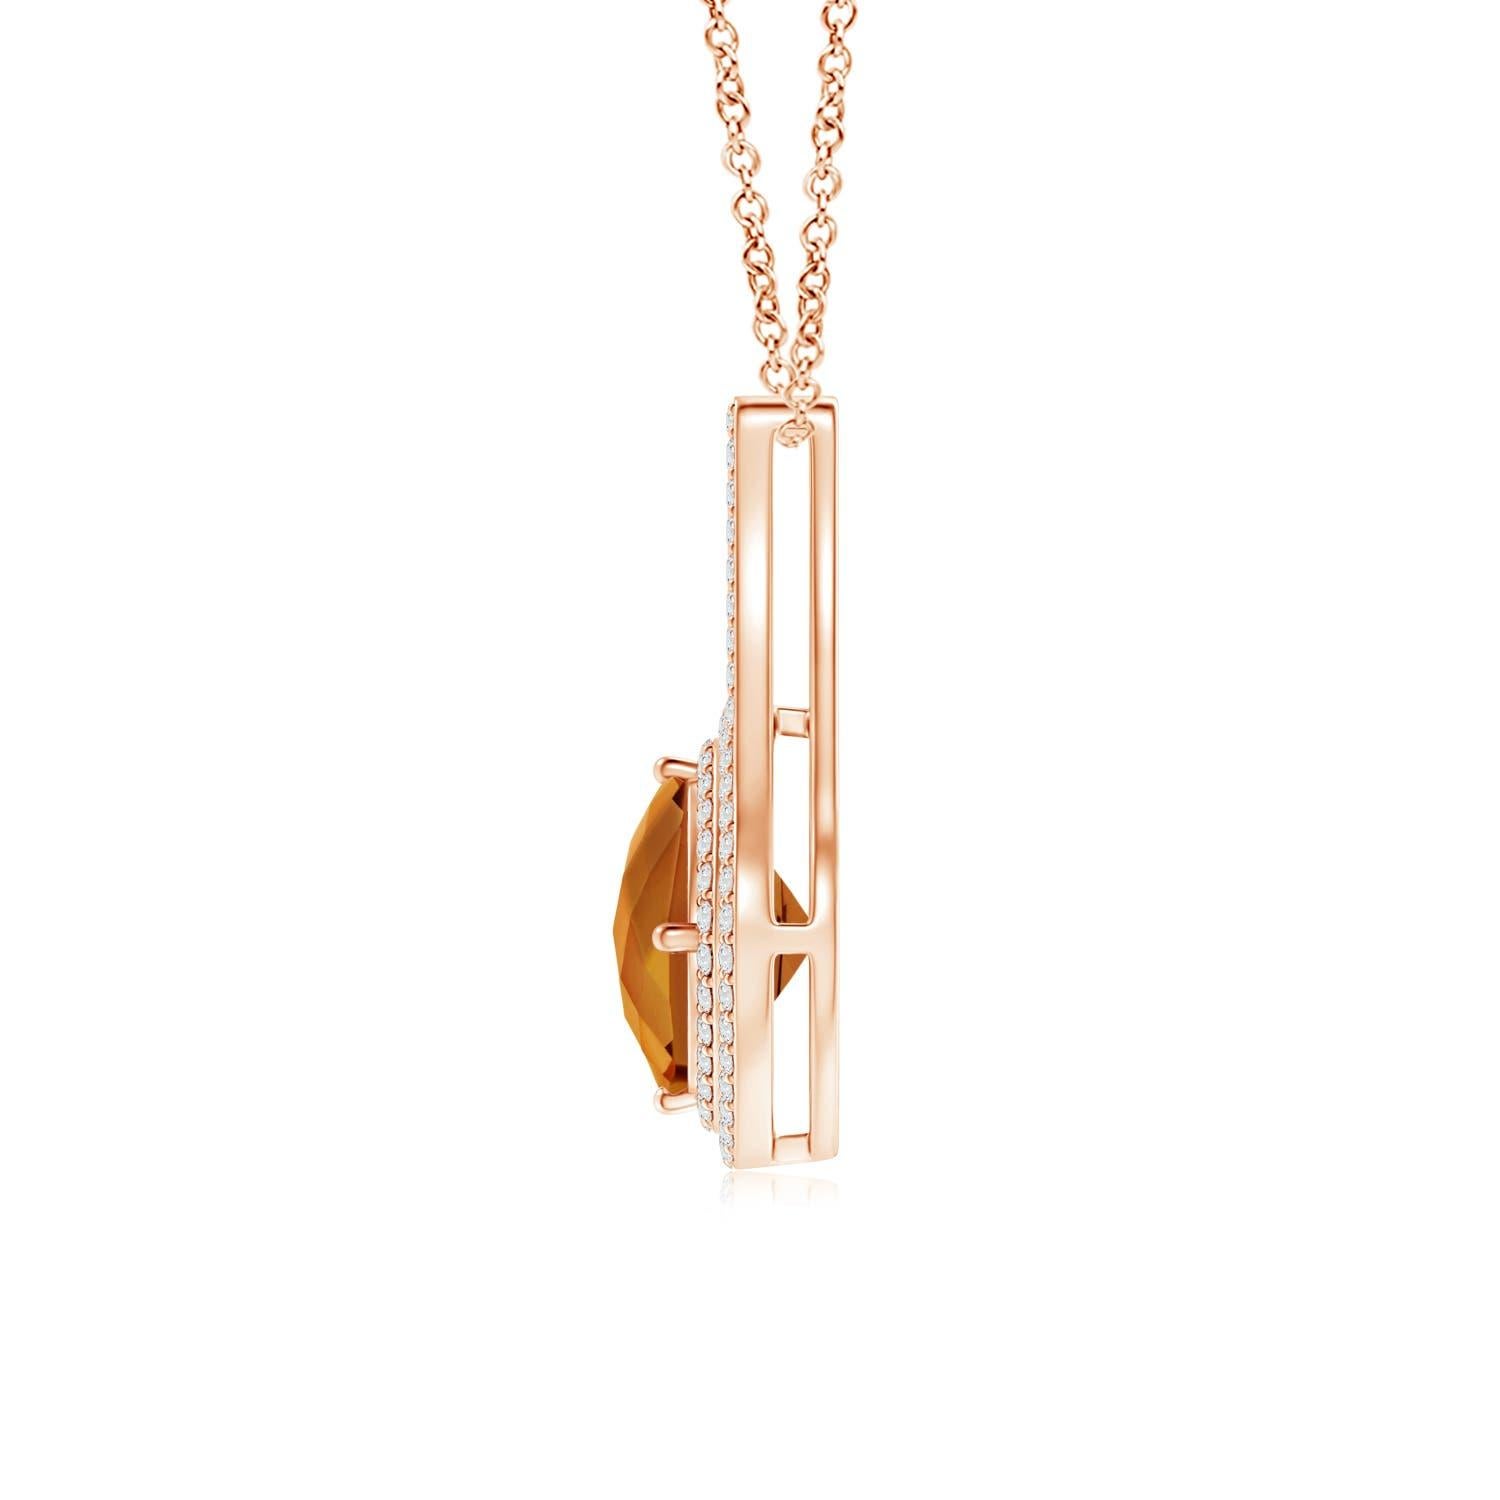 This splendid 18K Rose Gold pendant is designed with a dazzling inverted V-bale. It features a stunning GIA certified cushion yellowish orange zircon that is prong-set sideways and illuminated by a double halo of shimmering